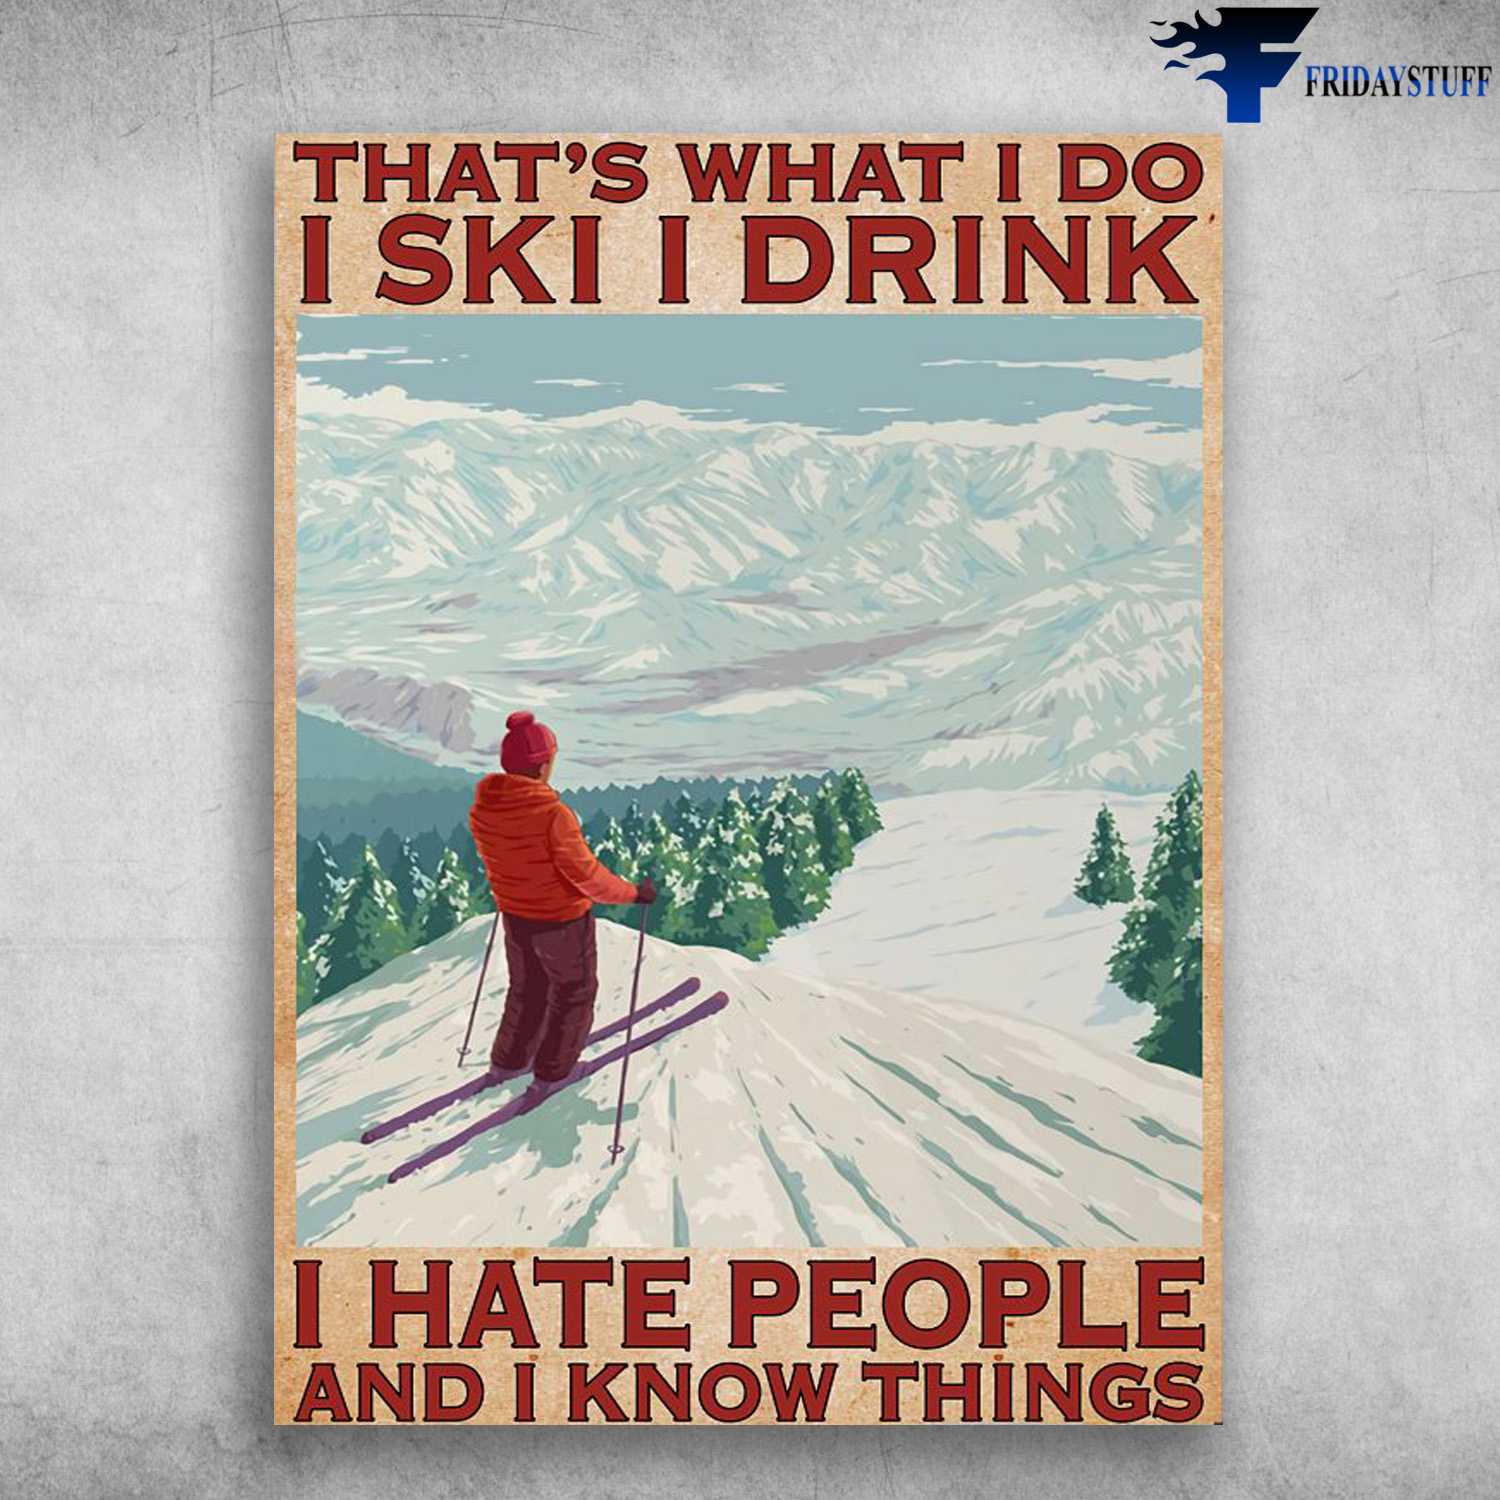 Skiing Lover, Skiing Poster, That's What I Do, I Ski, I Drink, I Hate People, And I Know Things